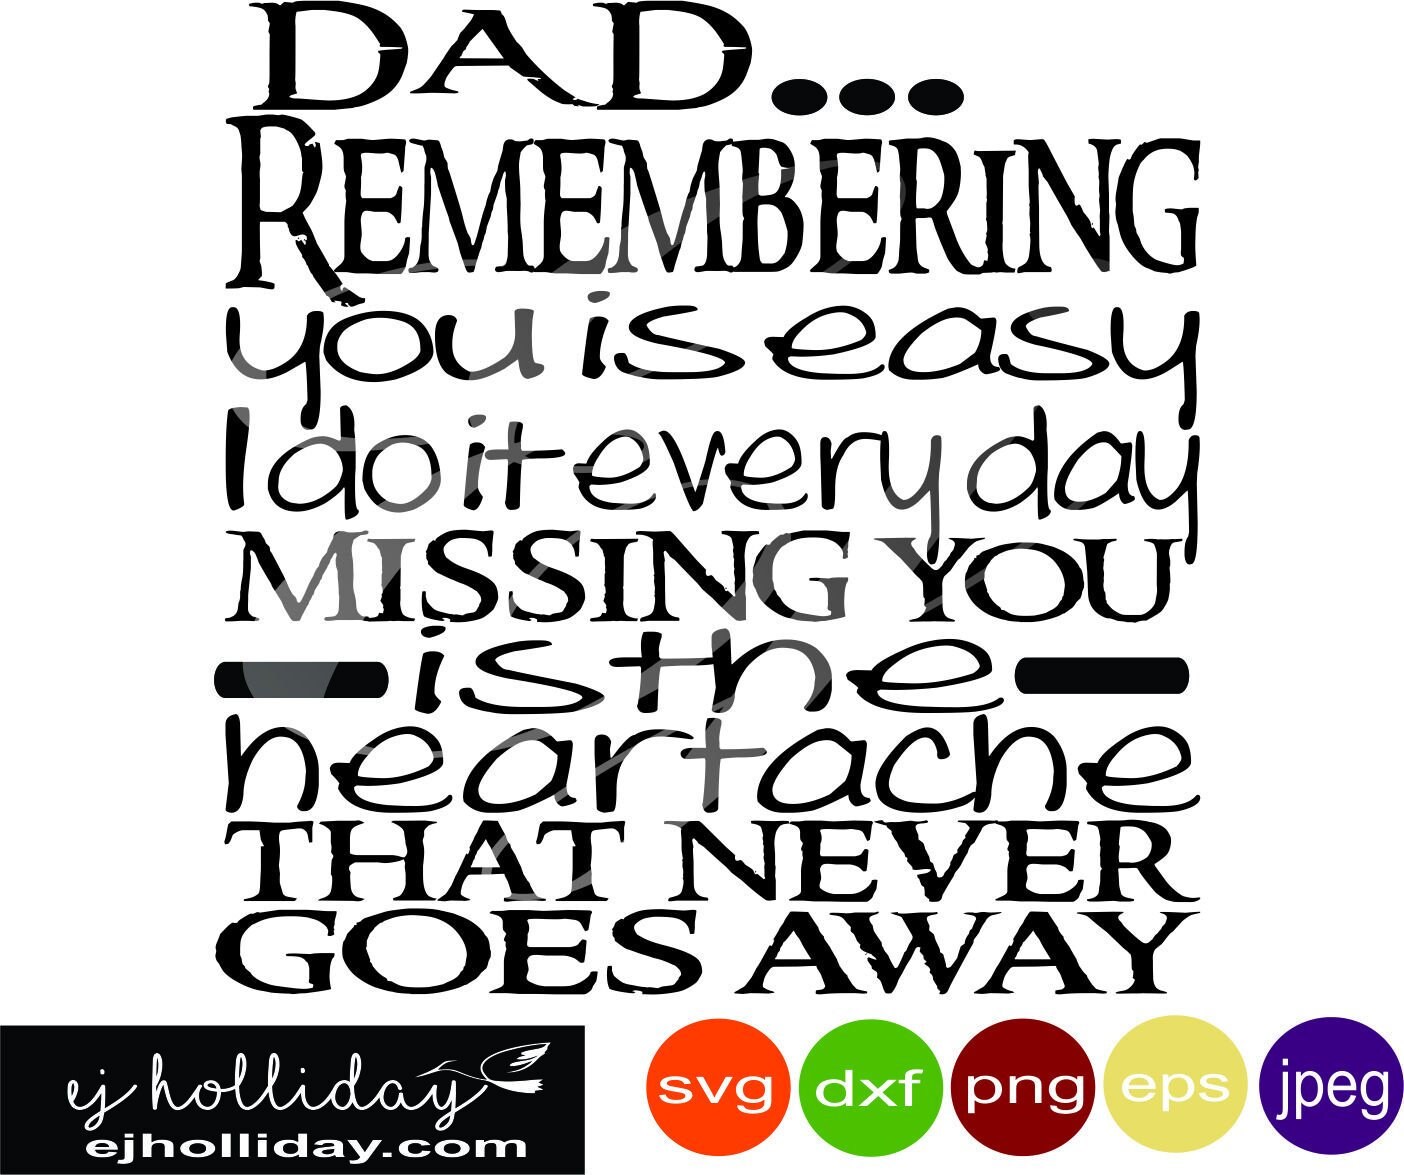 Remembering You Is Easy I Do It Every Day Missing You Heartache